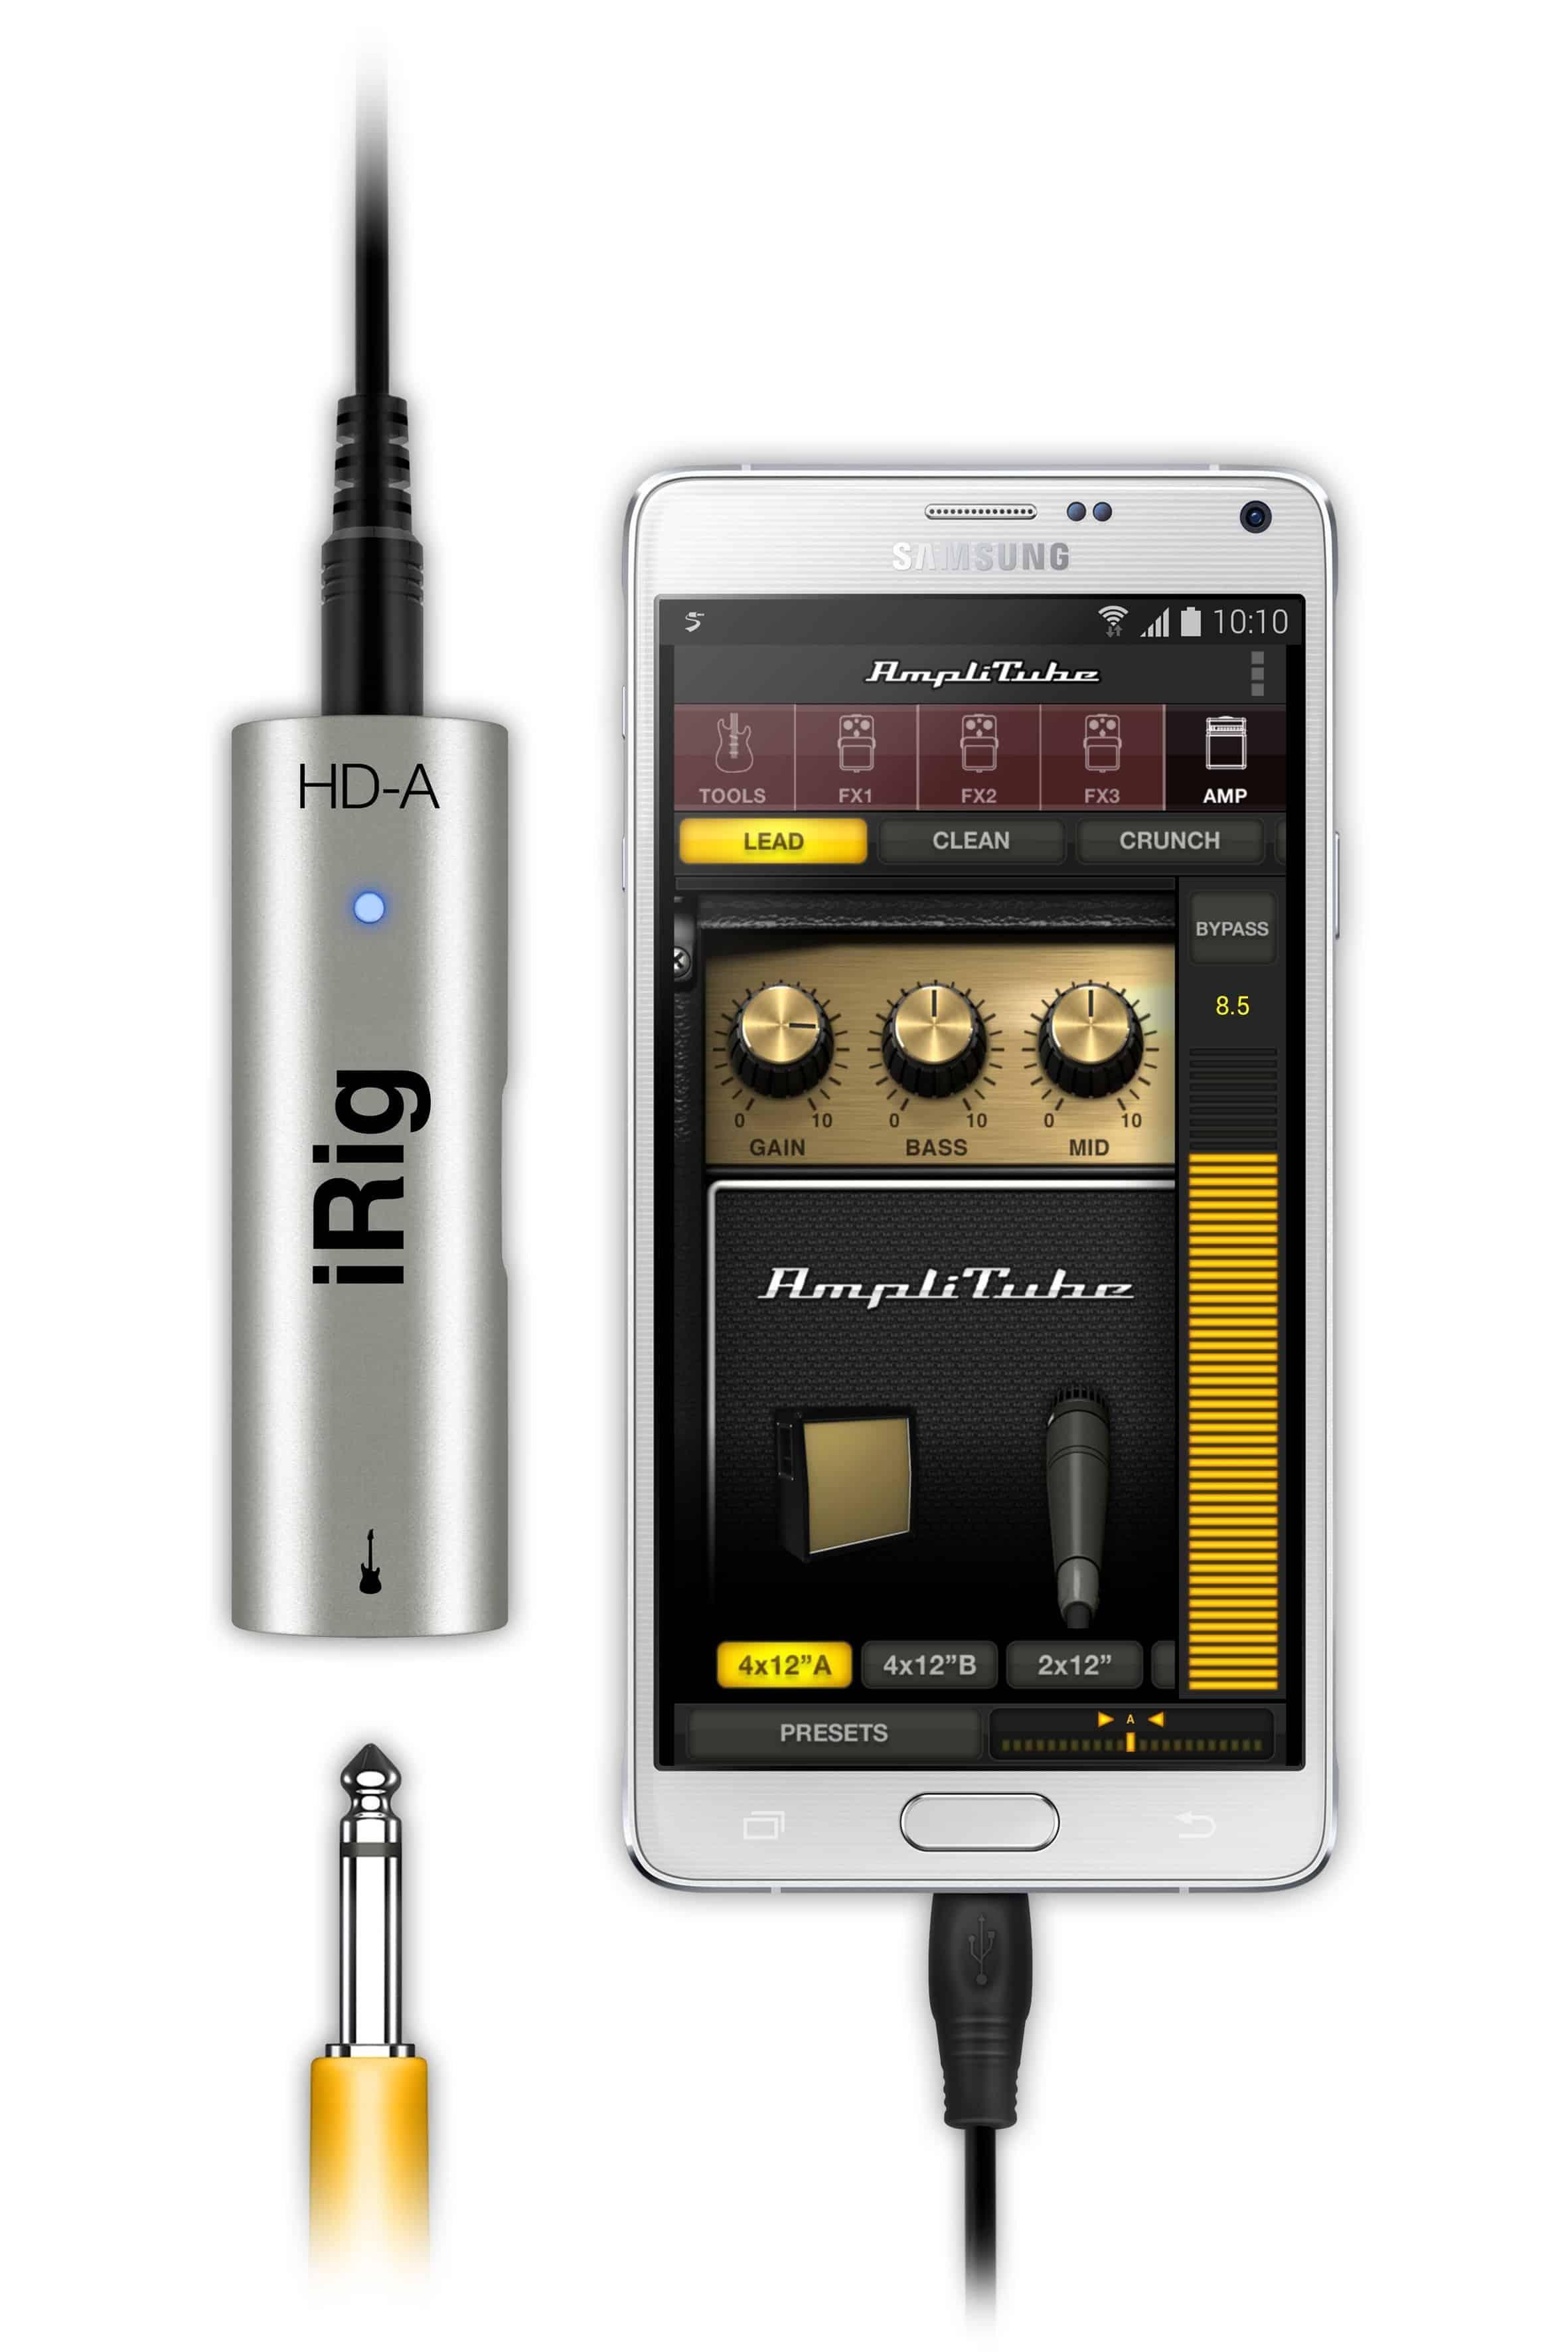 iRig HD-A High Quality Digital Guitar Interface for Android & PC - Live & Recording - Interfaces by IK Multimedia at Muso's Stuff